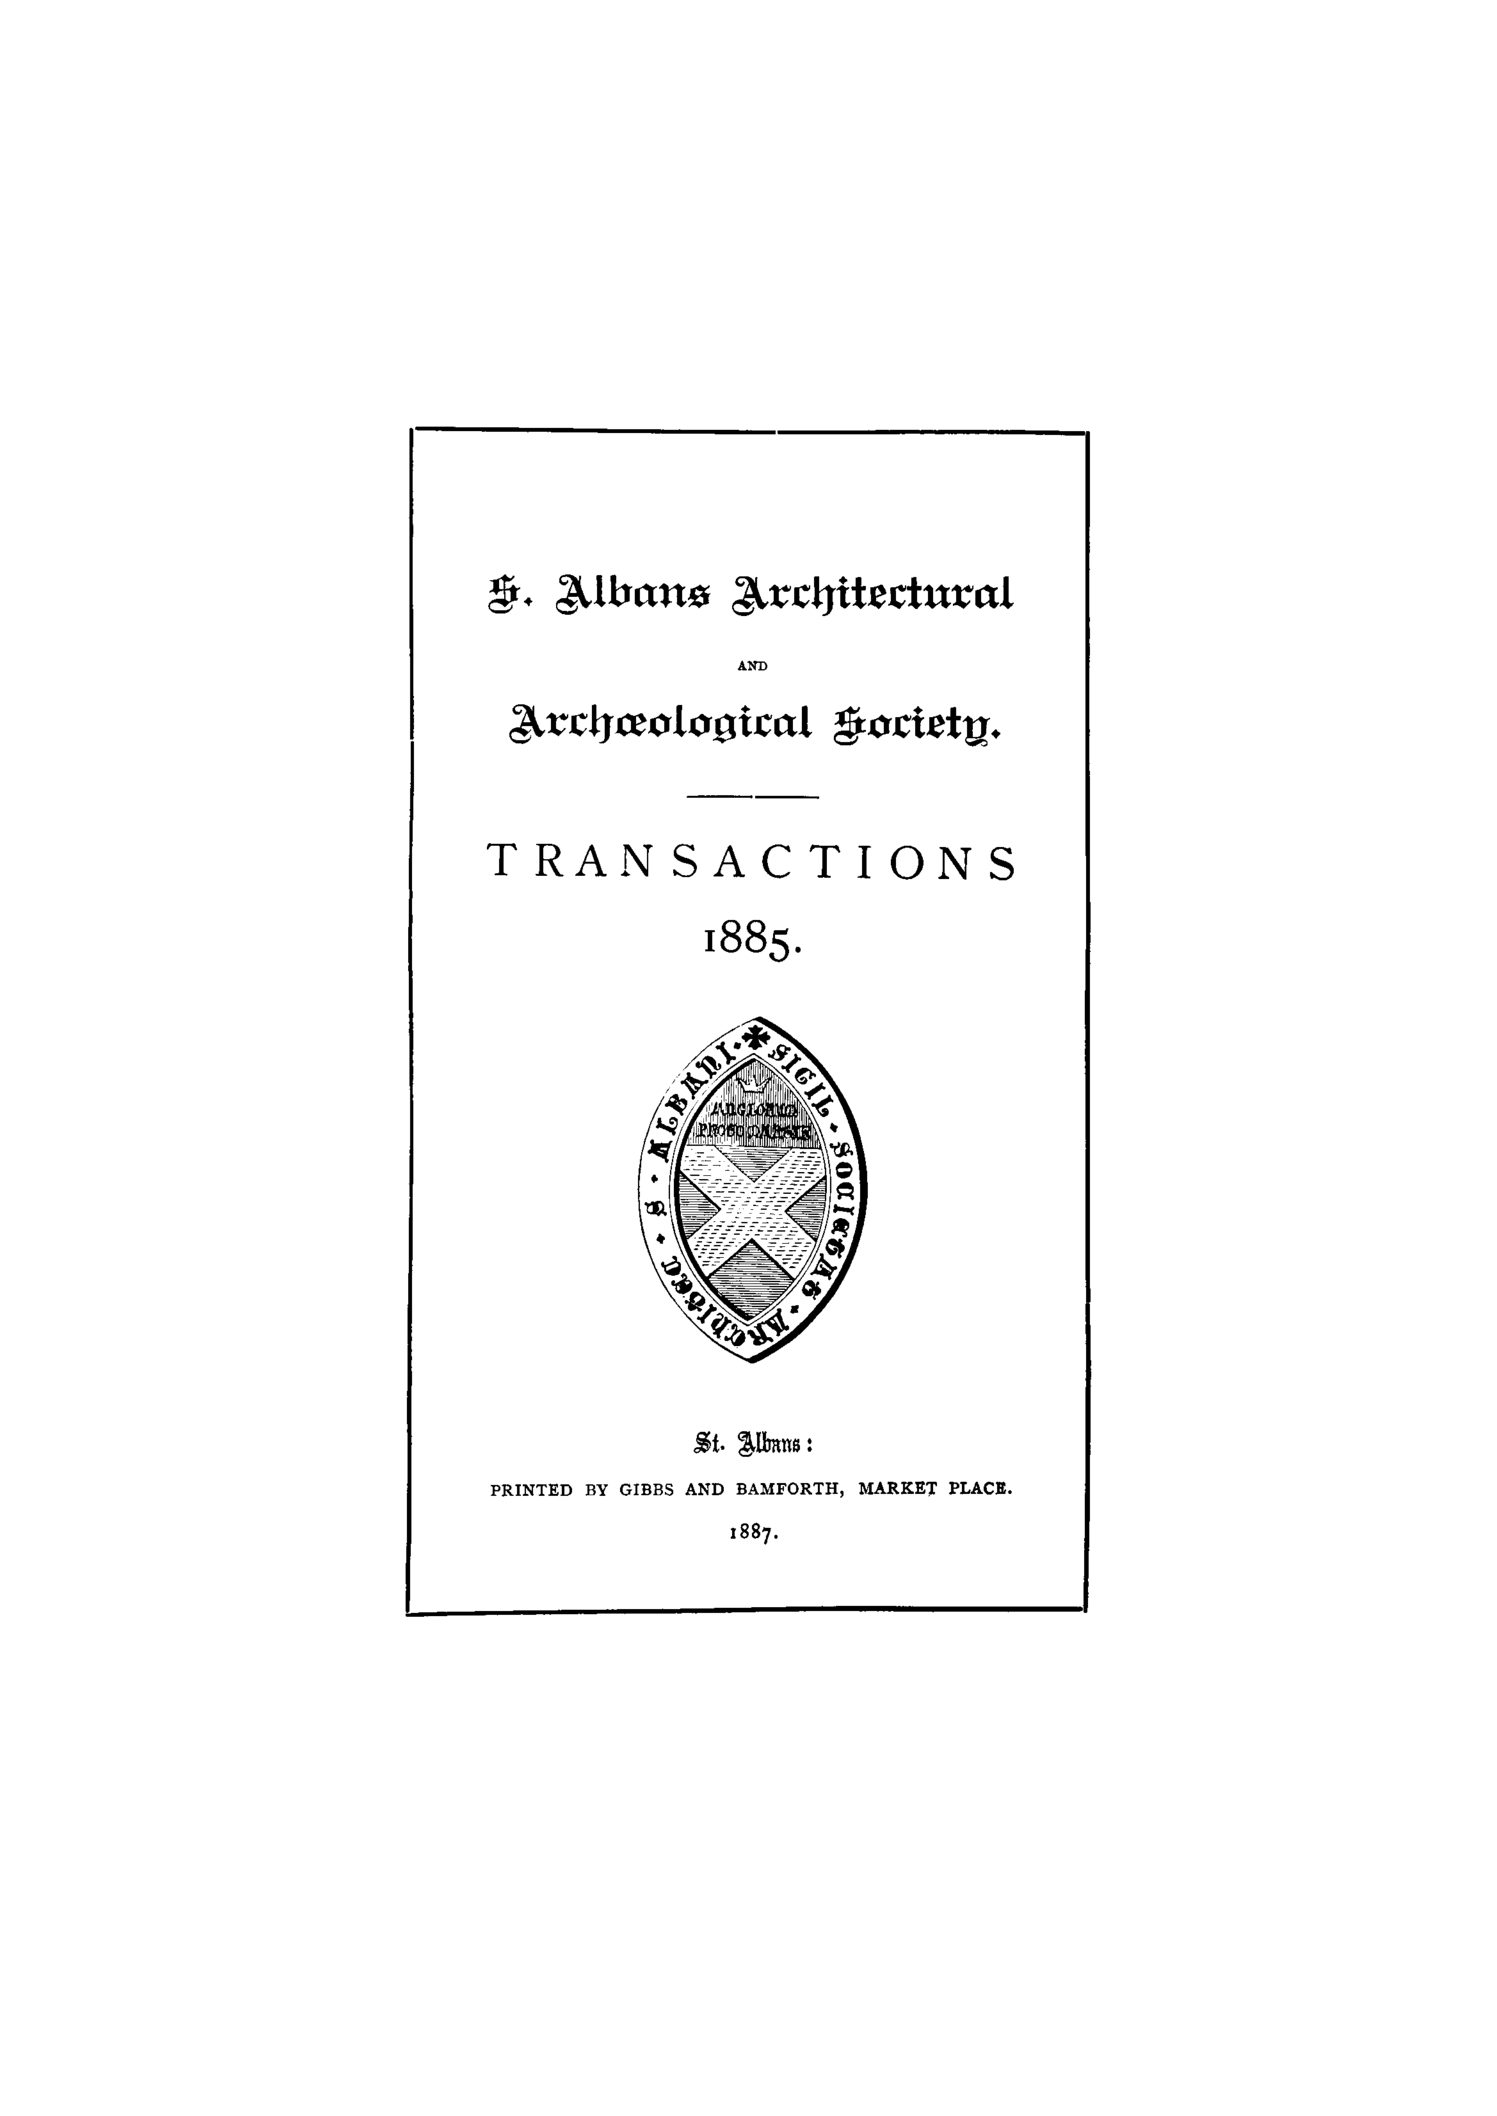 Transactions of the Society (1885)